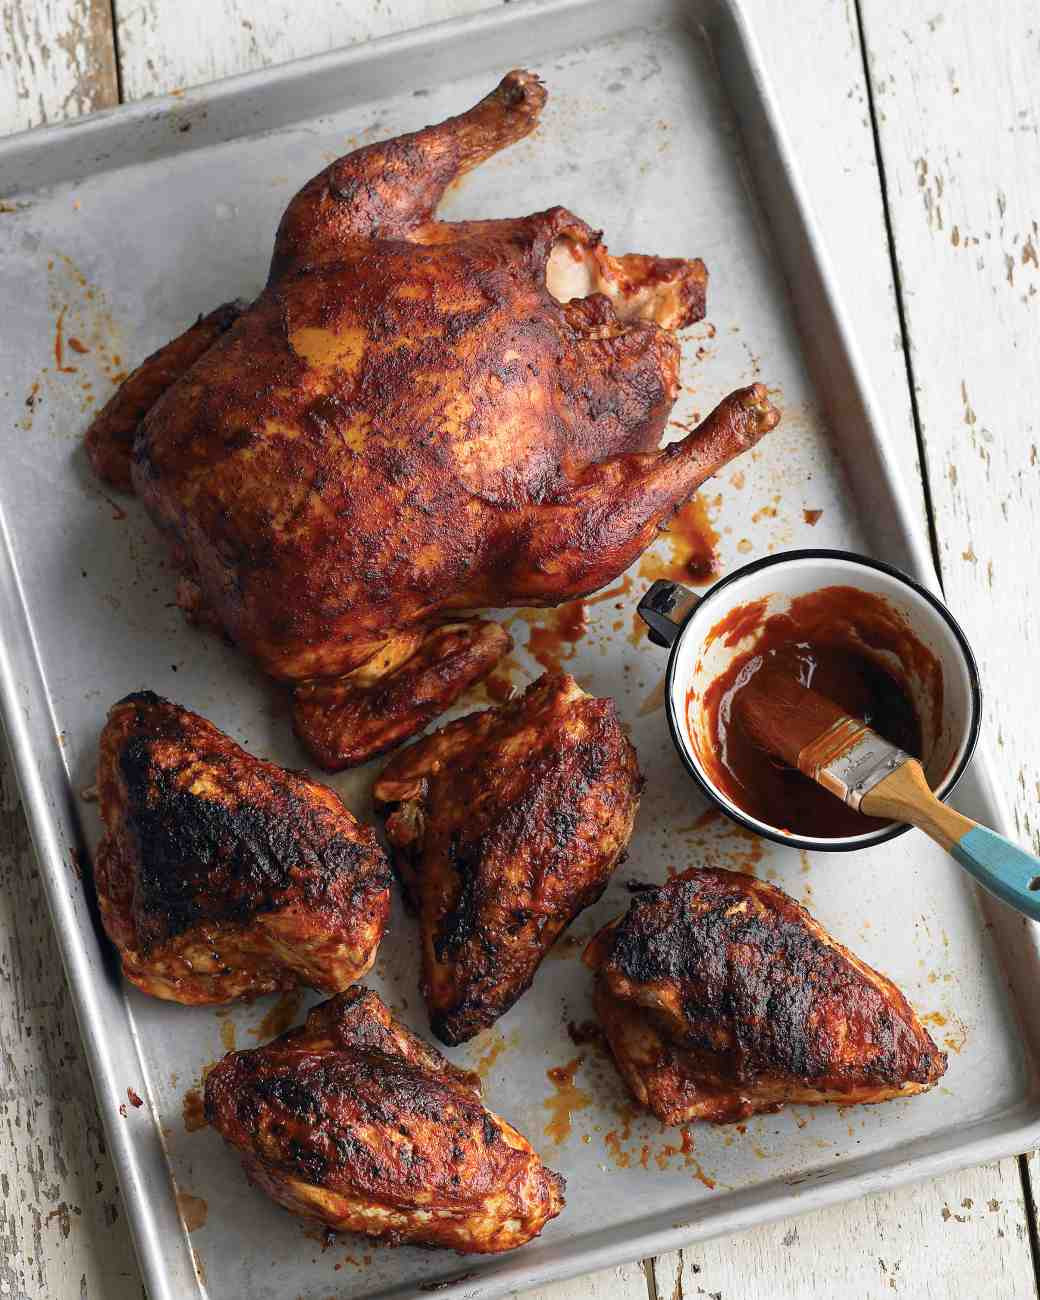 Grilling A Whole Chicken
 Grilled Whole Chicken with Barbecue Sauce Recipe